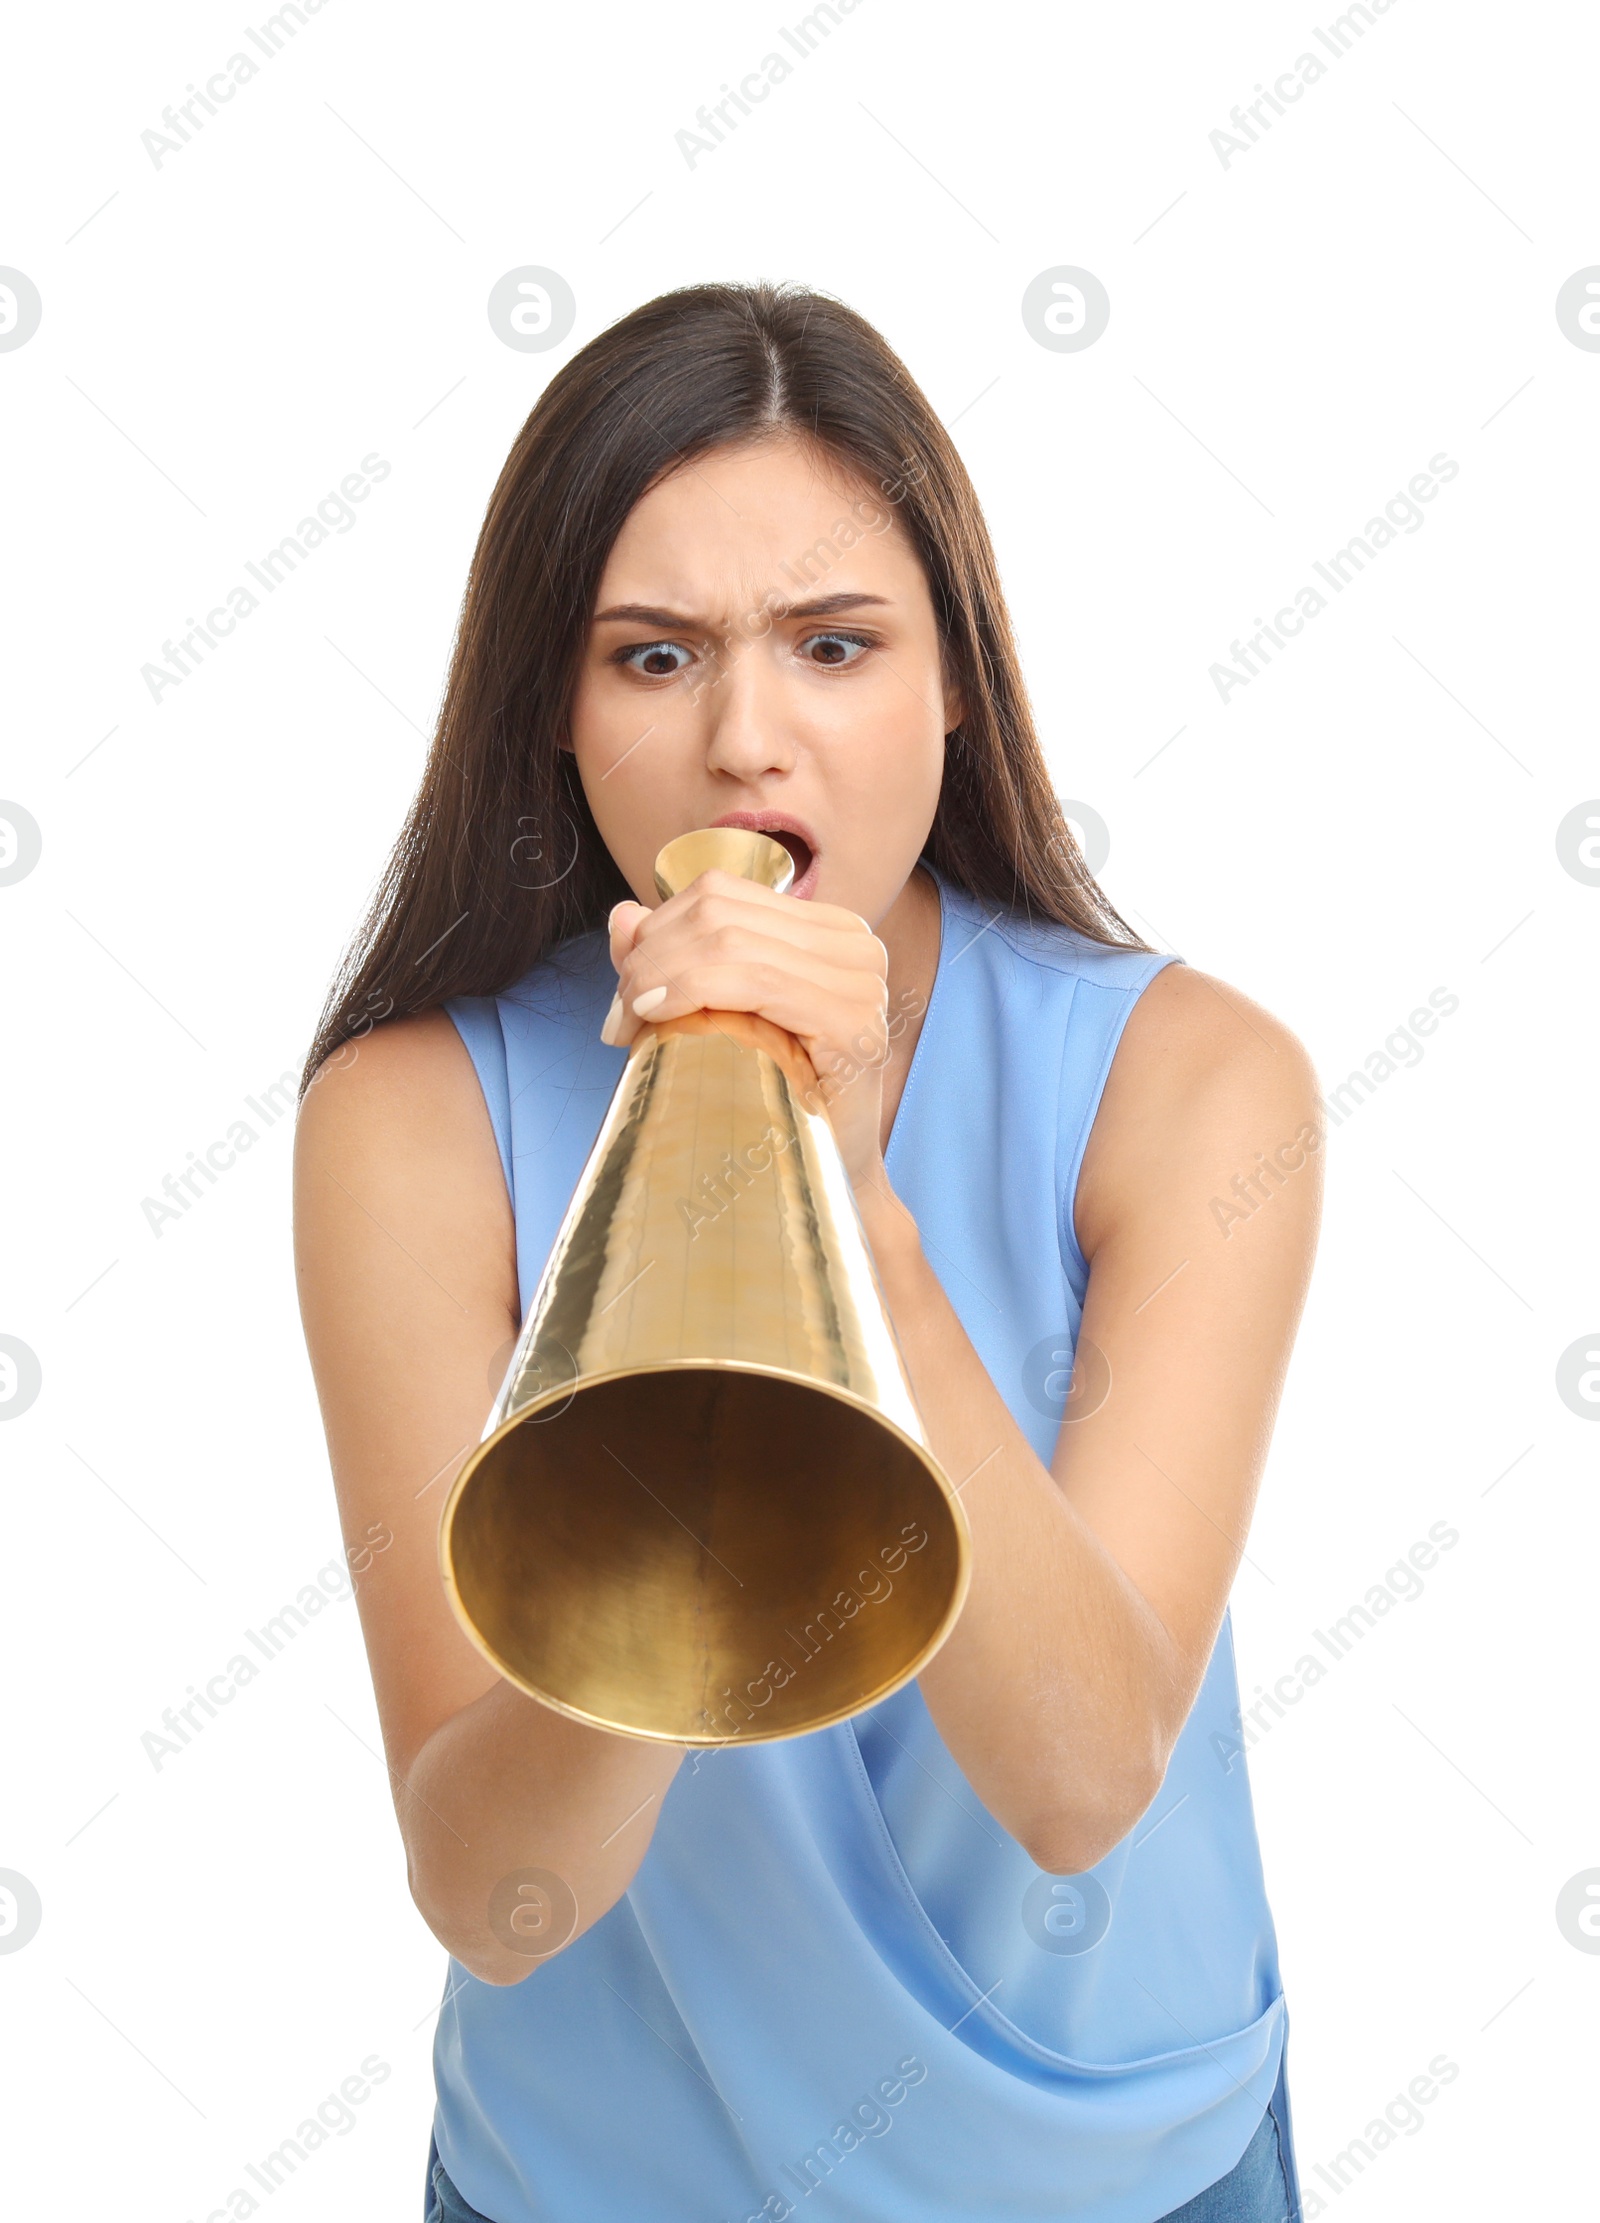 Photo of Young woman using megaphone on white background